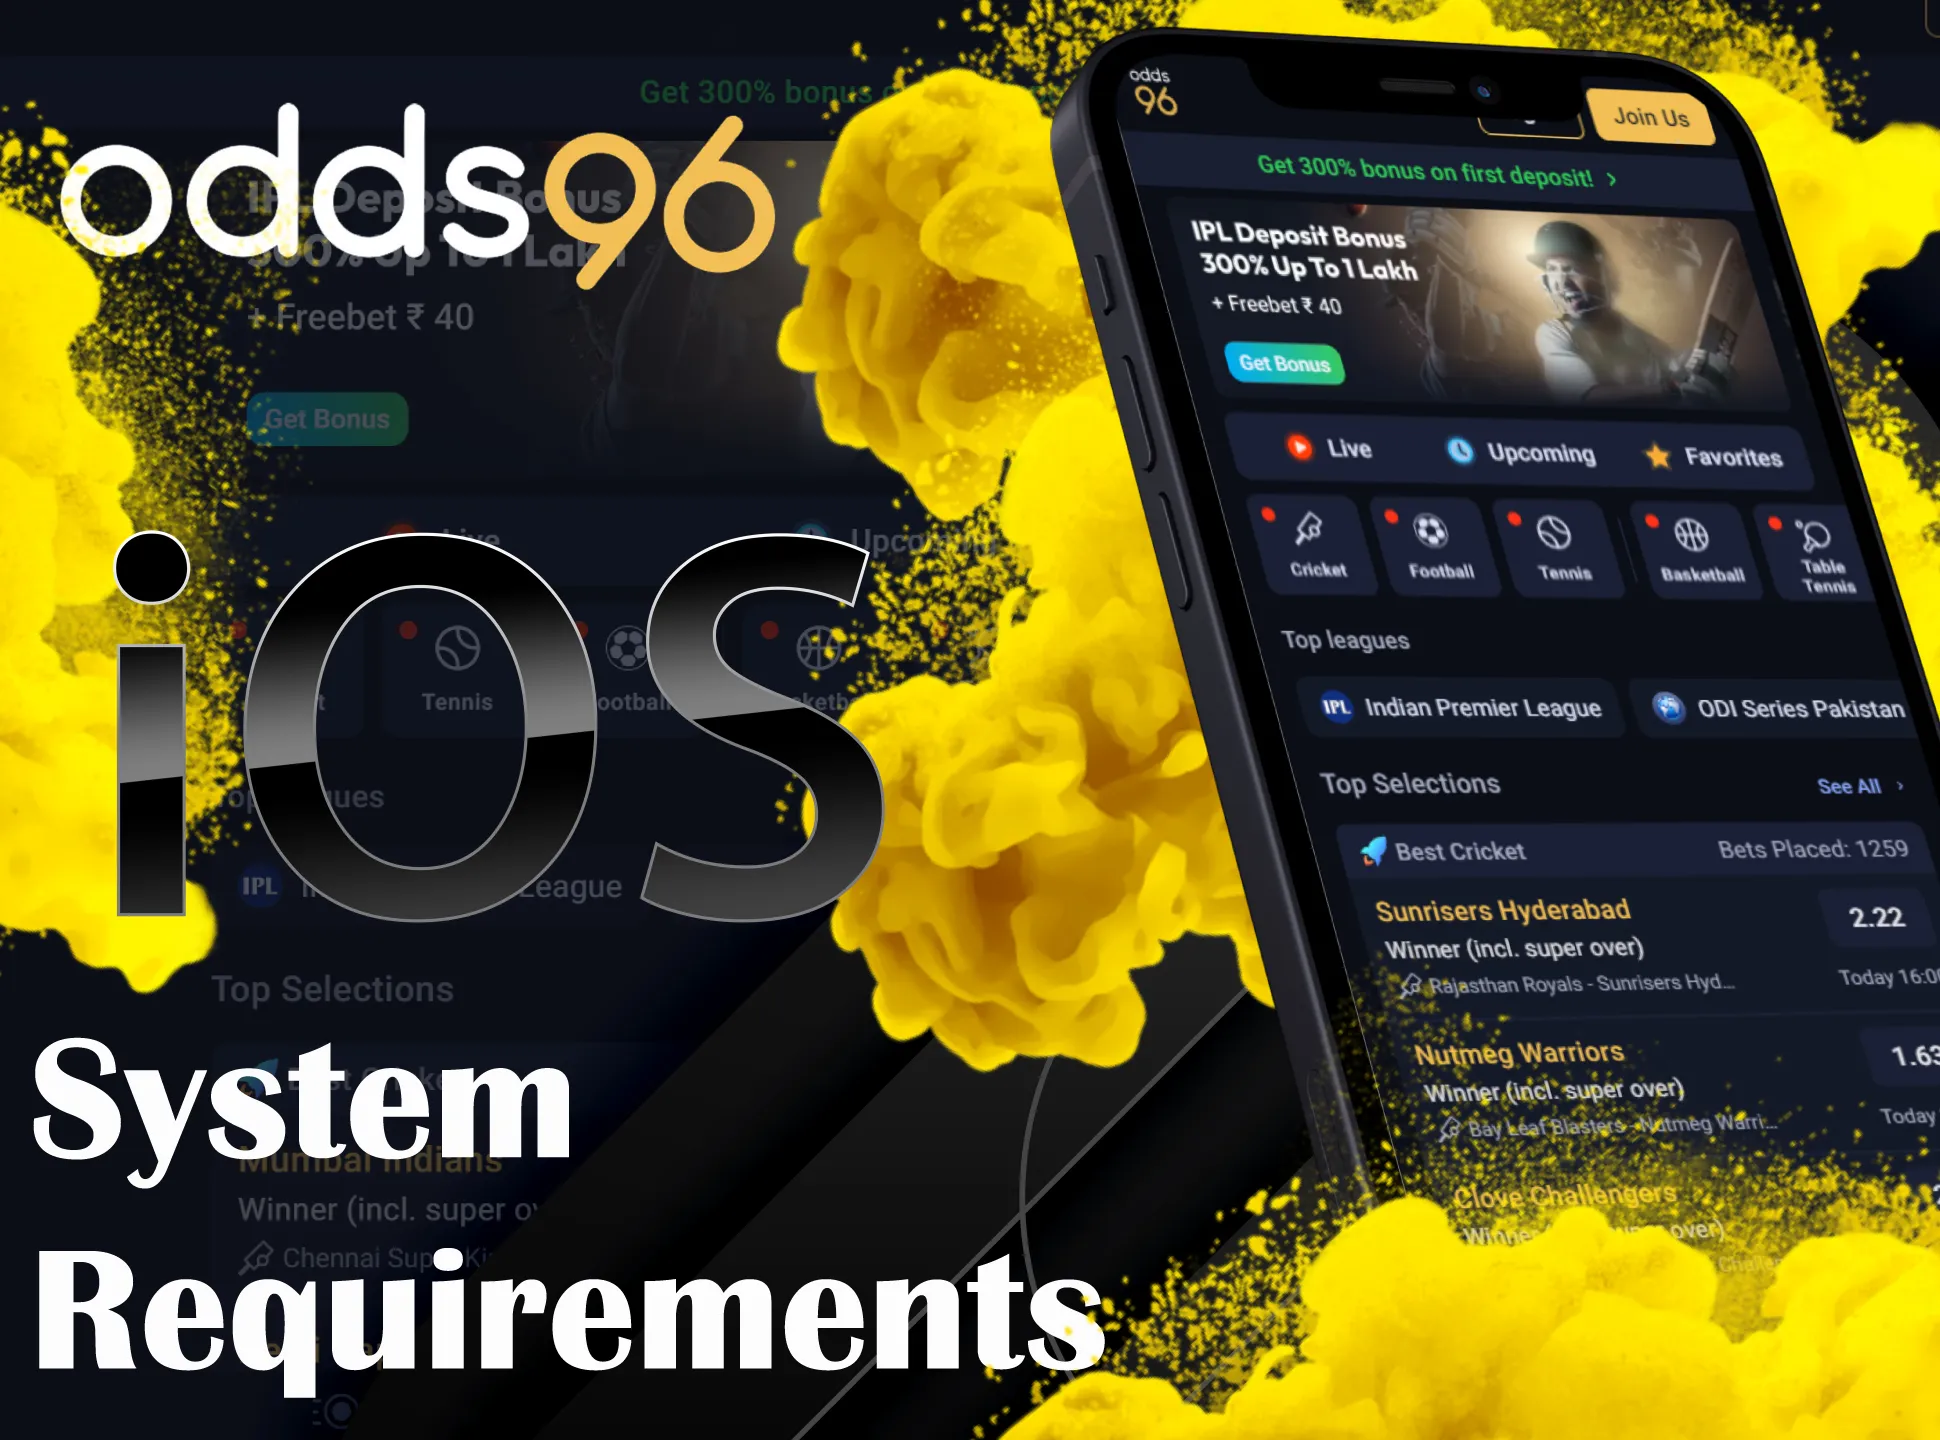 Odds96 iOS app can be installed on all of new Apple devices.